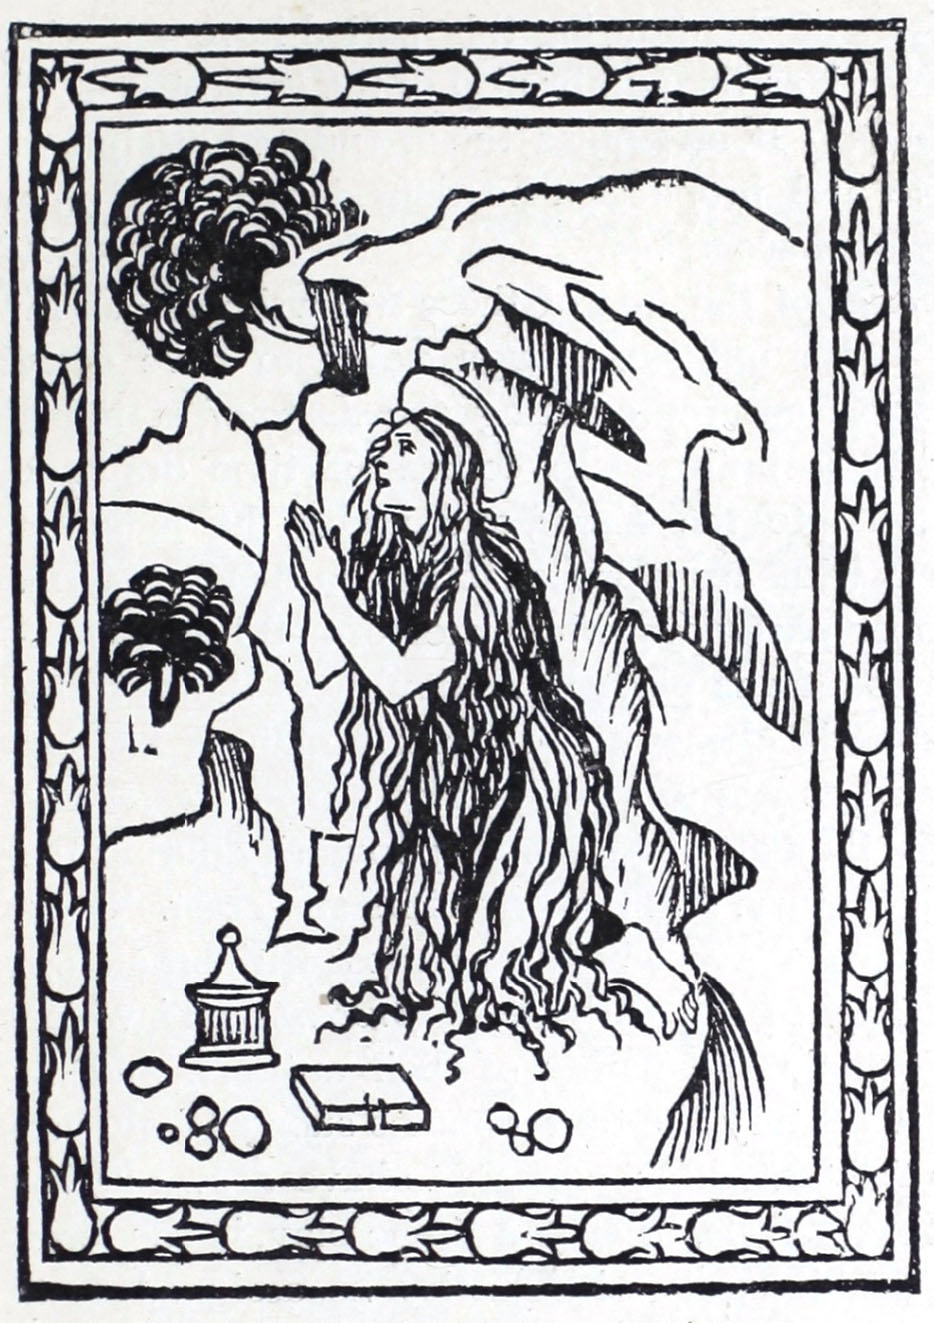 Wood engraved image shows a woman with a halo and long hair kneeling in an mountainous landscape with hands pressed together in prayer position. She is looing upward and to the left. 